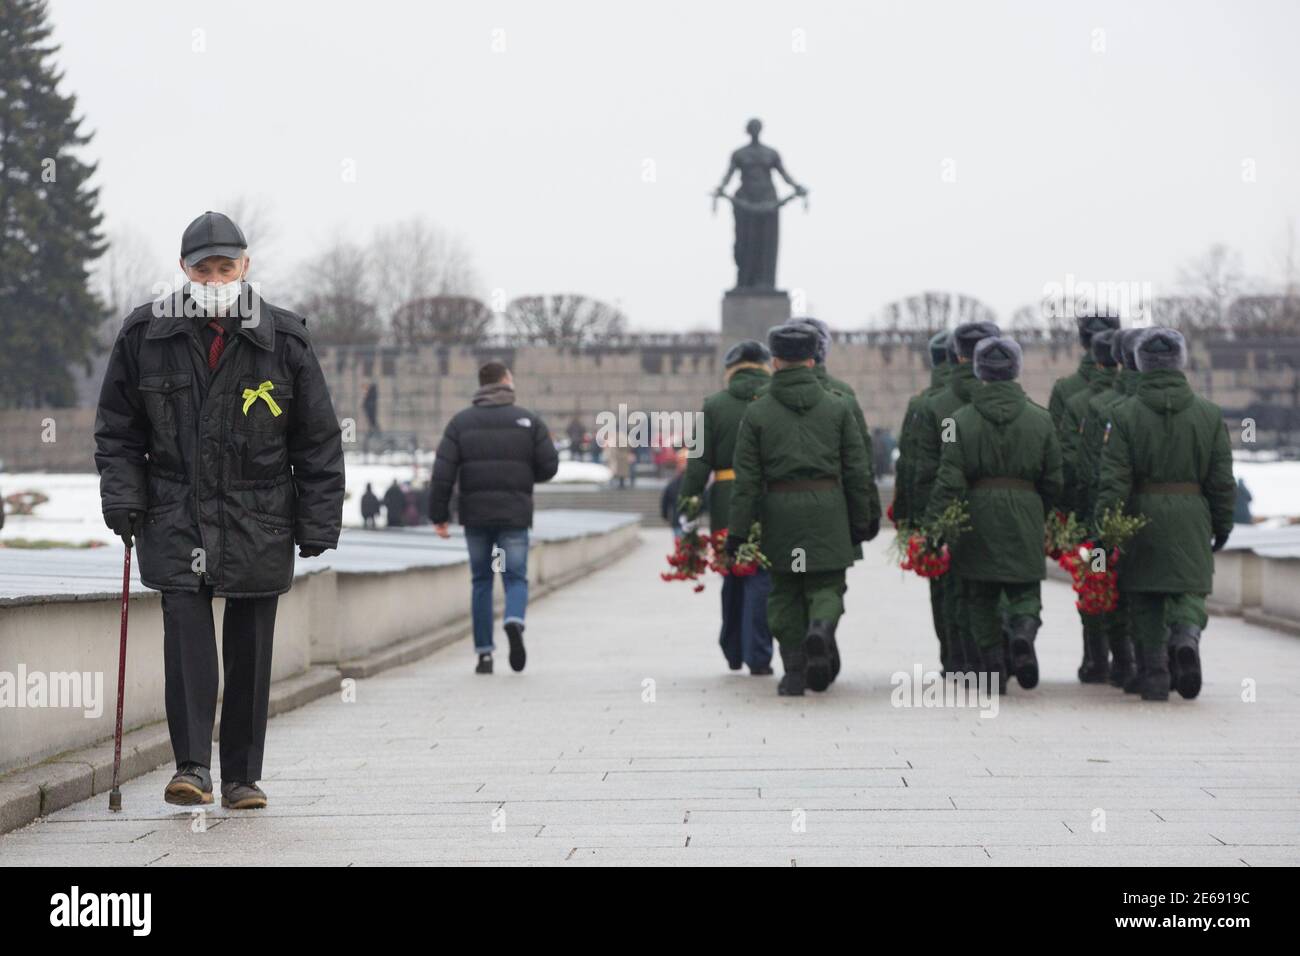 Beijing, Russia. 27th Jan, 2021. An elder leaves after paying tribute to victims at the Piskaryovskoye Memorial Cemetery in St. Petersburg, Russia, Jan. 27, 2021. Activities were held here to mark the 77th anniversary of ending the Nazi siege of Leningrad during World War II. Credit: Irina Motina/Xinhua/Alamy Live News Stock Photo